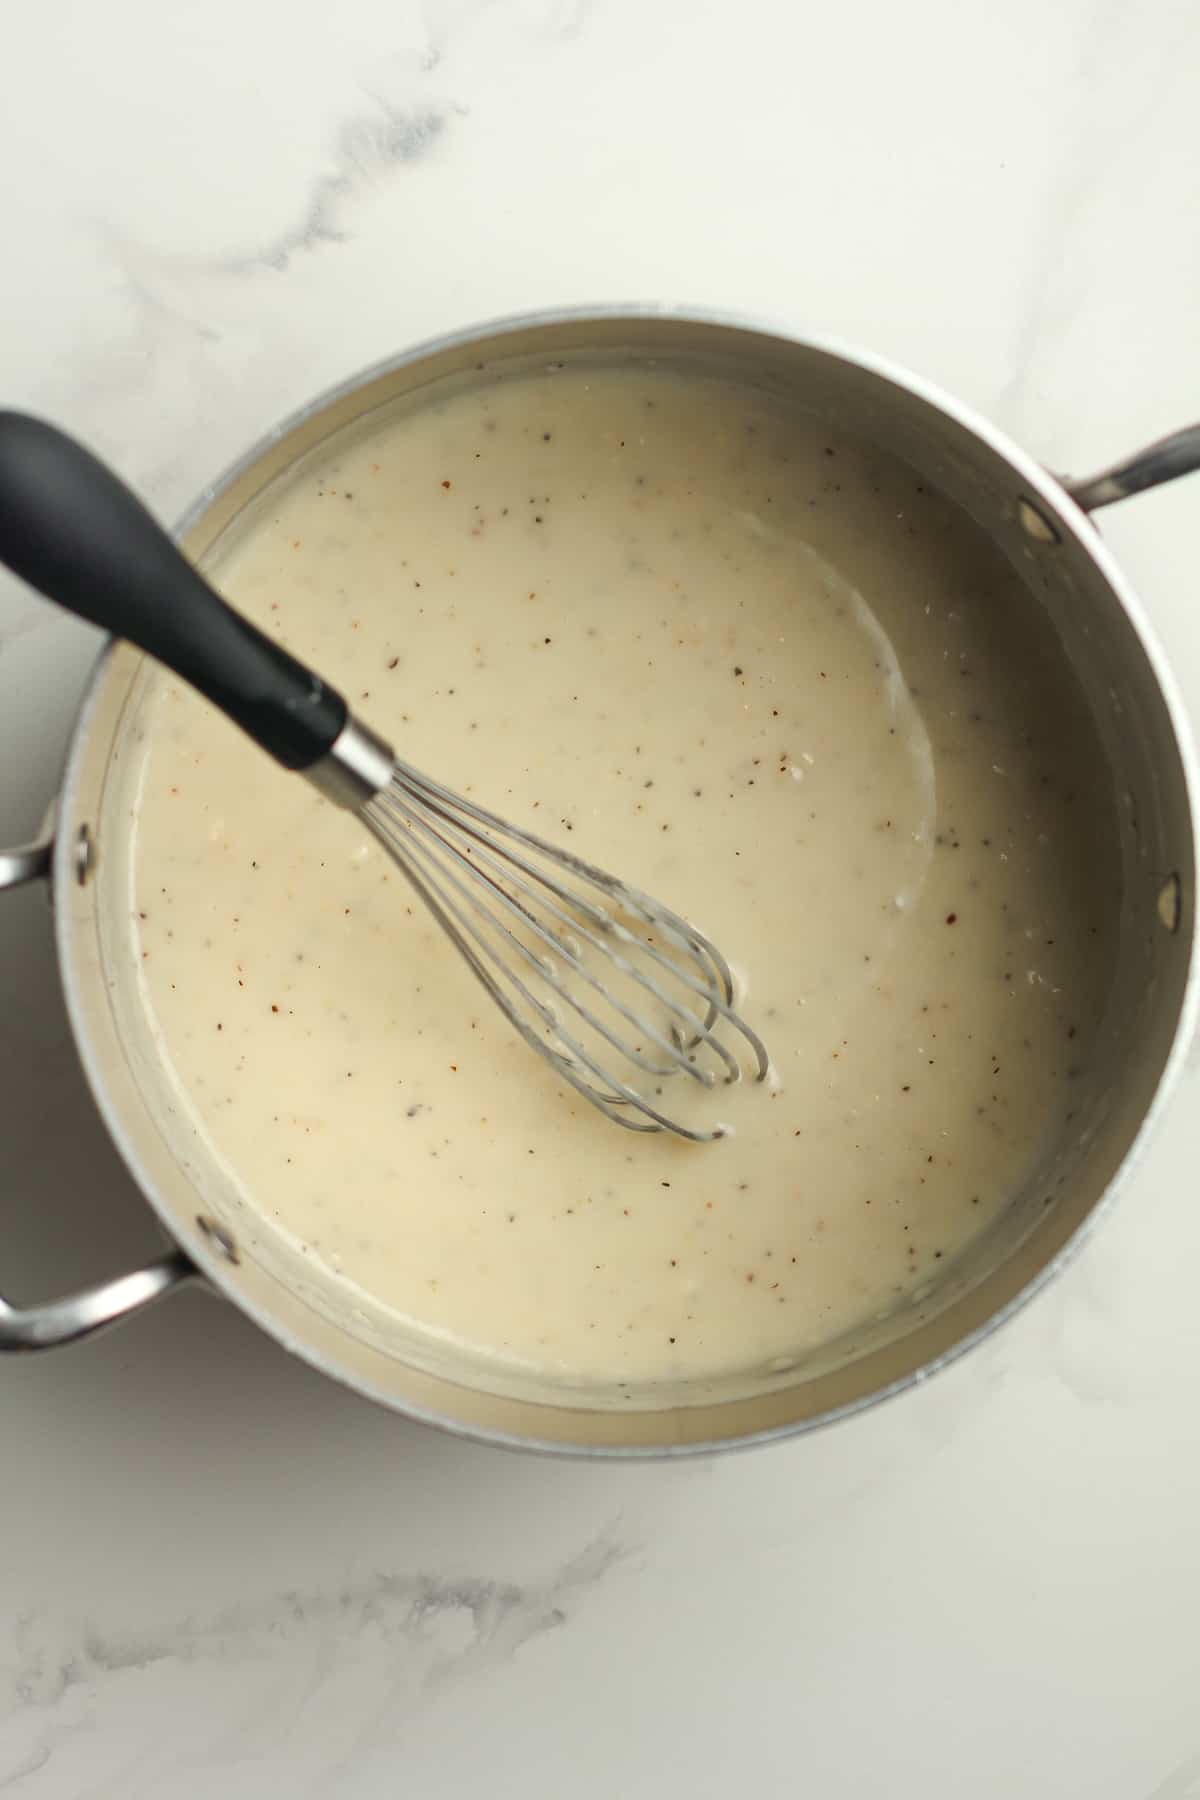 A pan of the cream of chicken soup substitute.